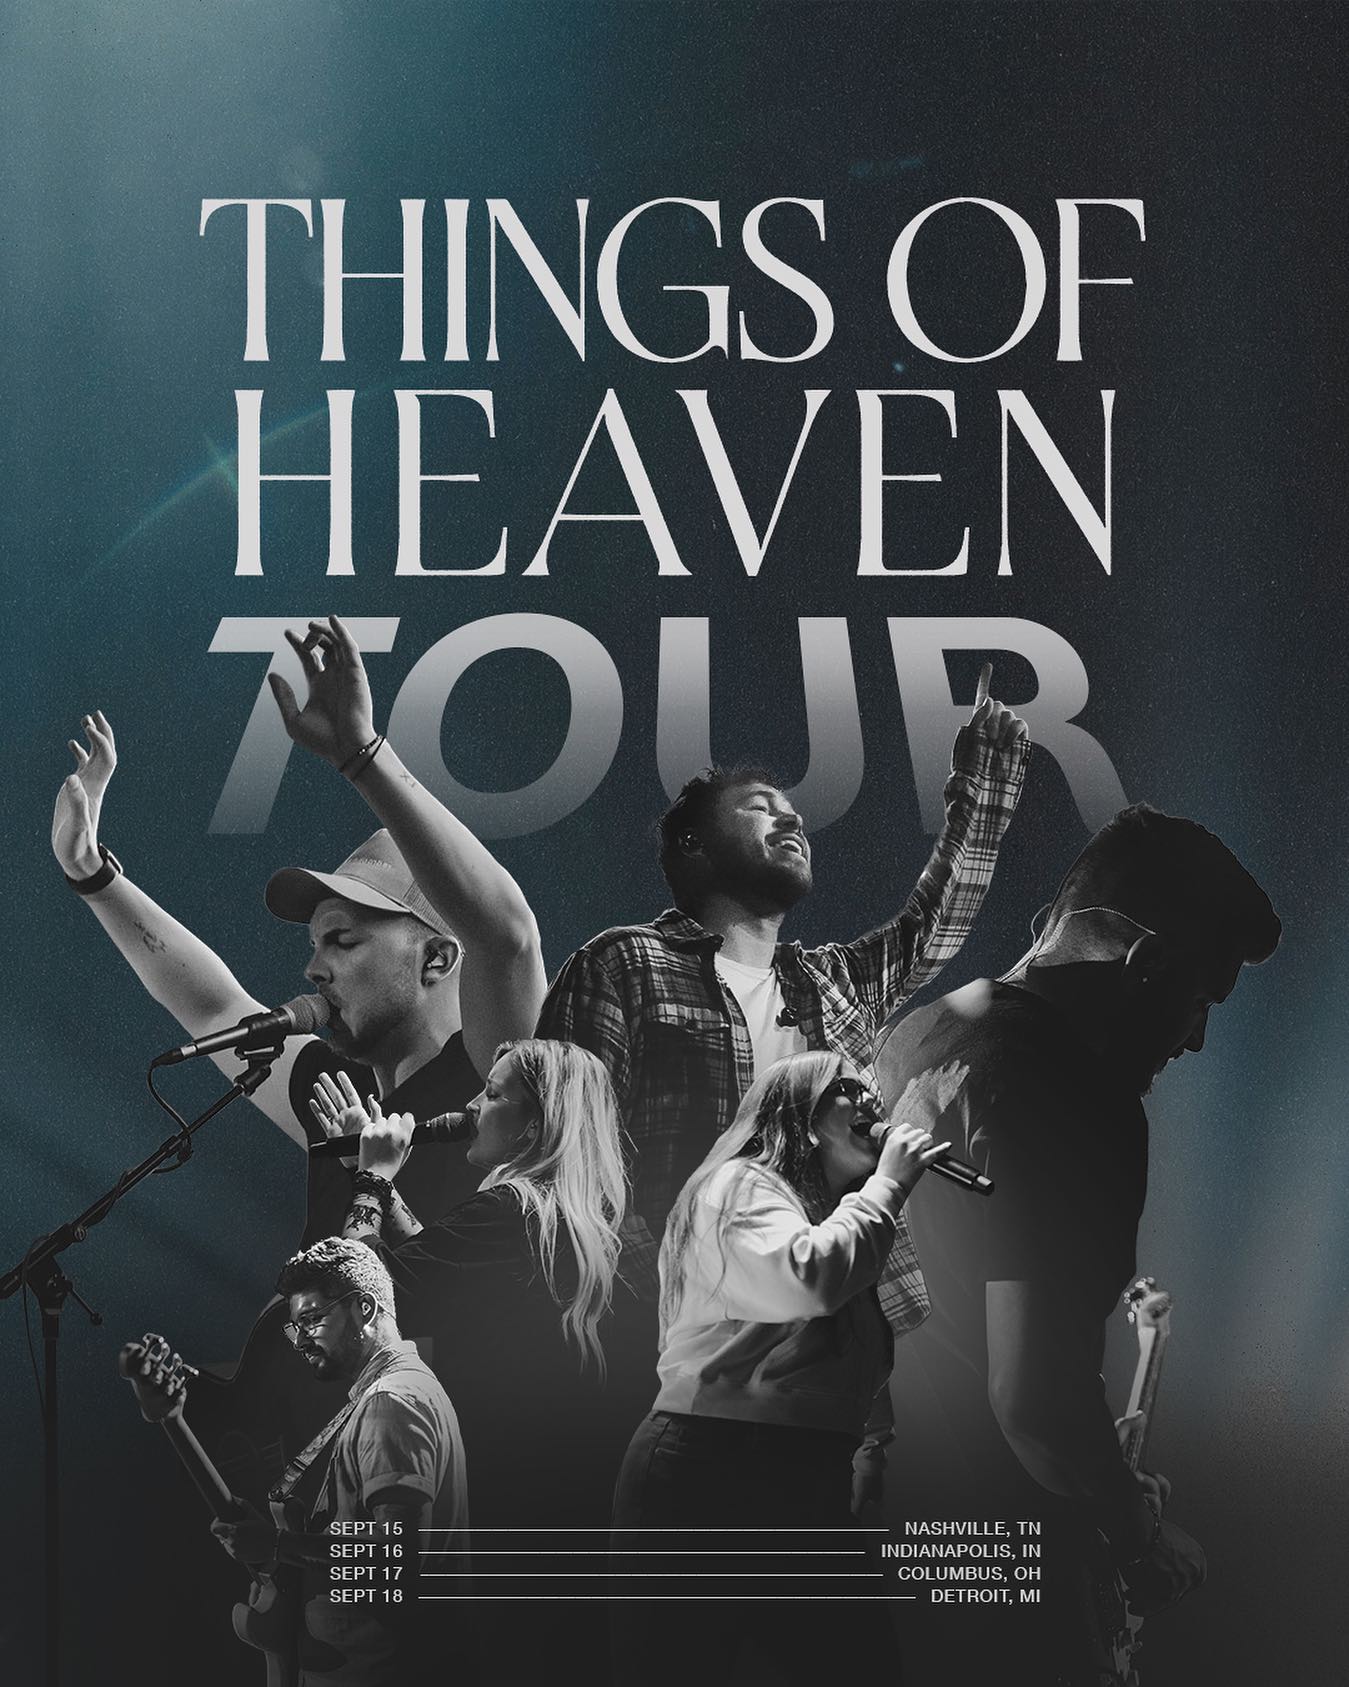 JUST ANNOUNCED! New dates on the Things of Heaven tour with @redrocksworship 🙌 Set those alarms now! Pre-sale begins Tuesday (7/19) at 10am. Text RRWPRESALE to 1-844-809-7392 to receive the code.